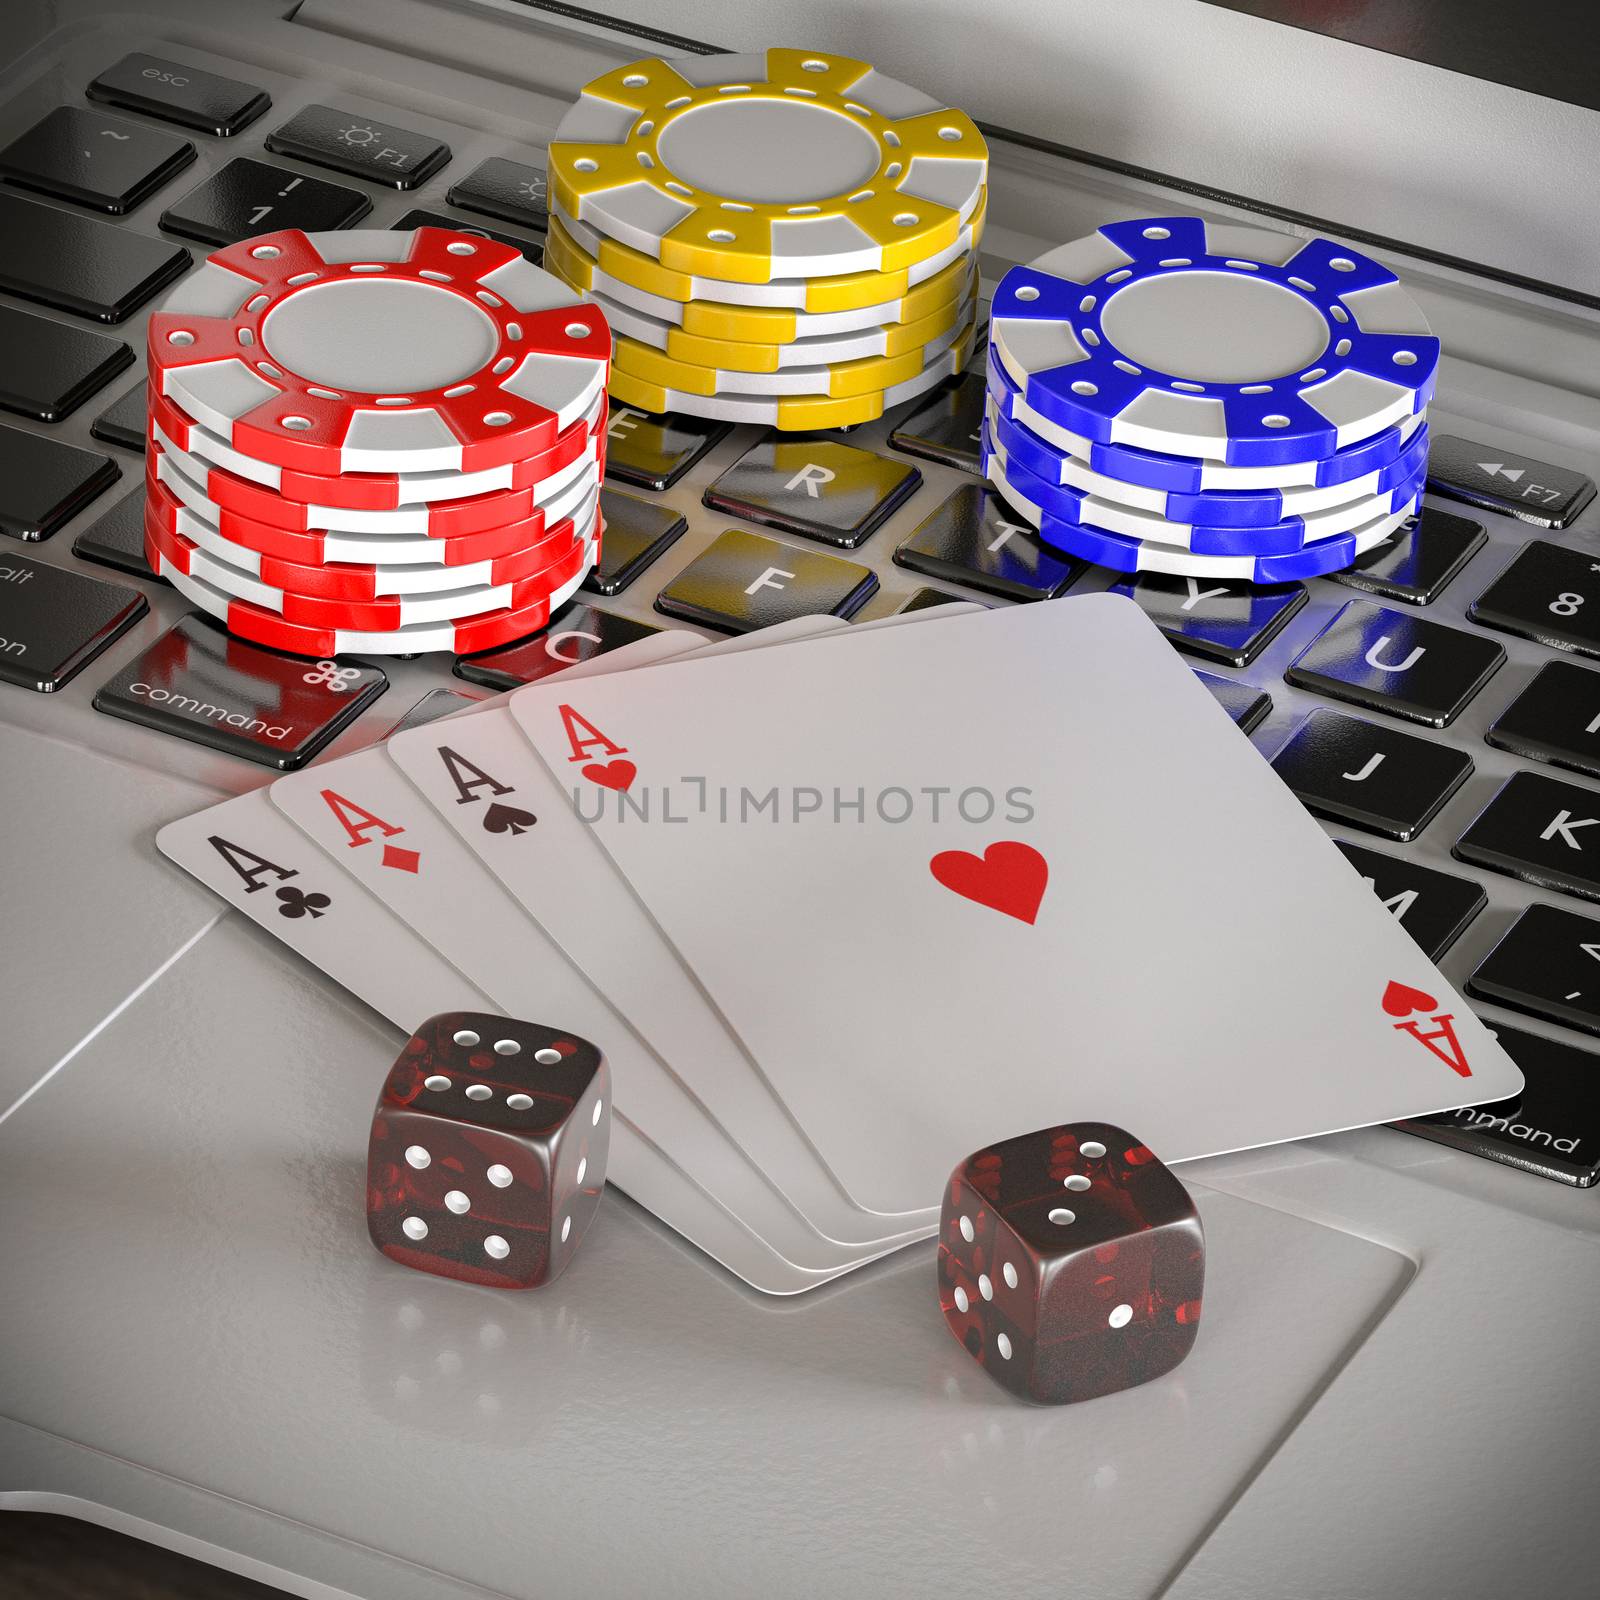 laptop with chips, dices and poker cards on the table